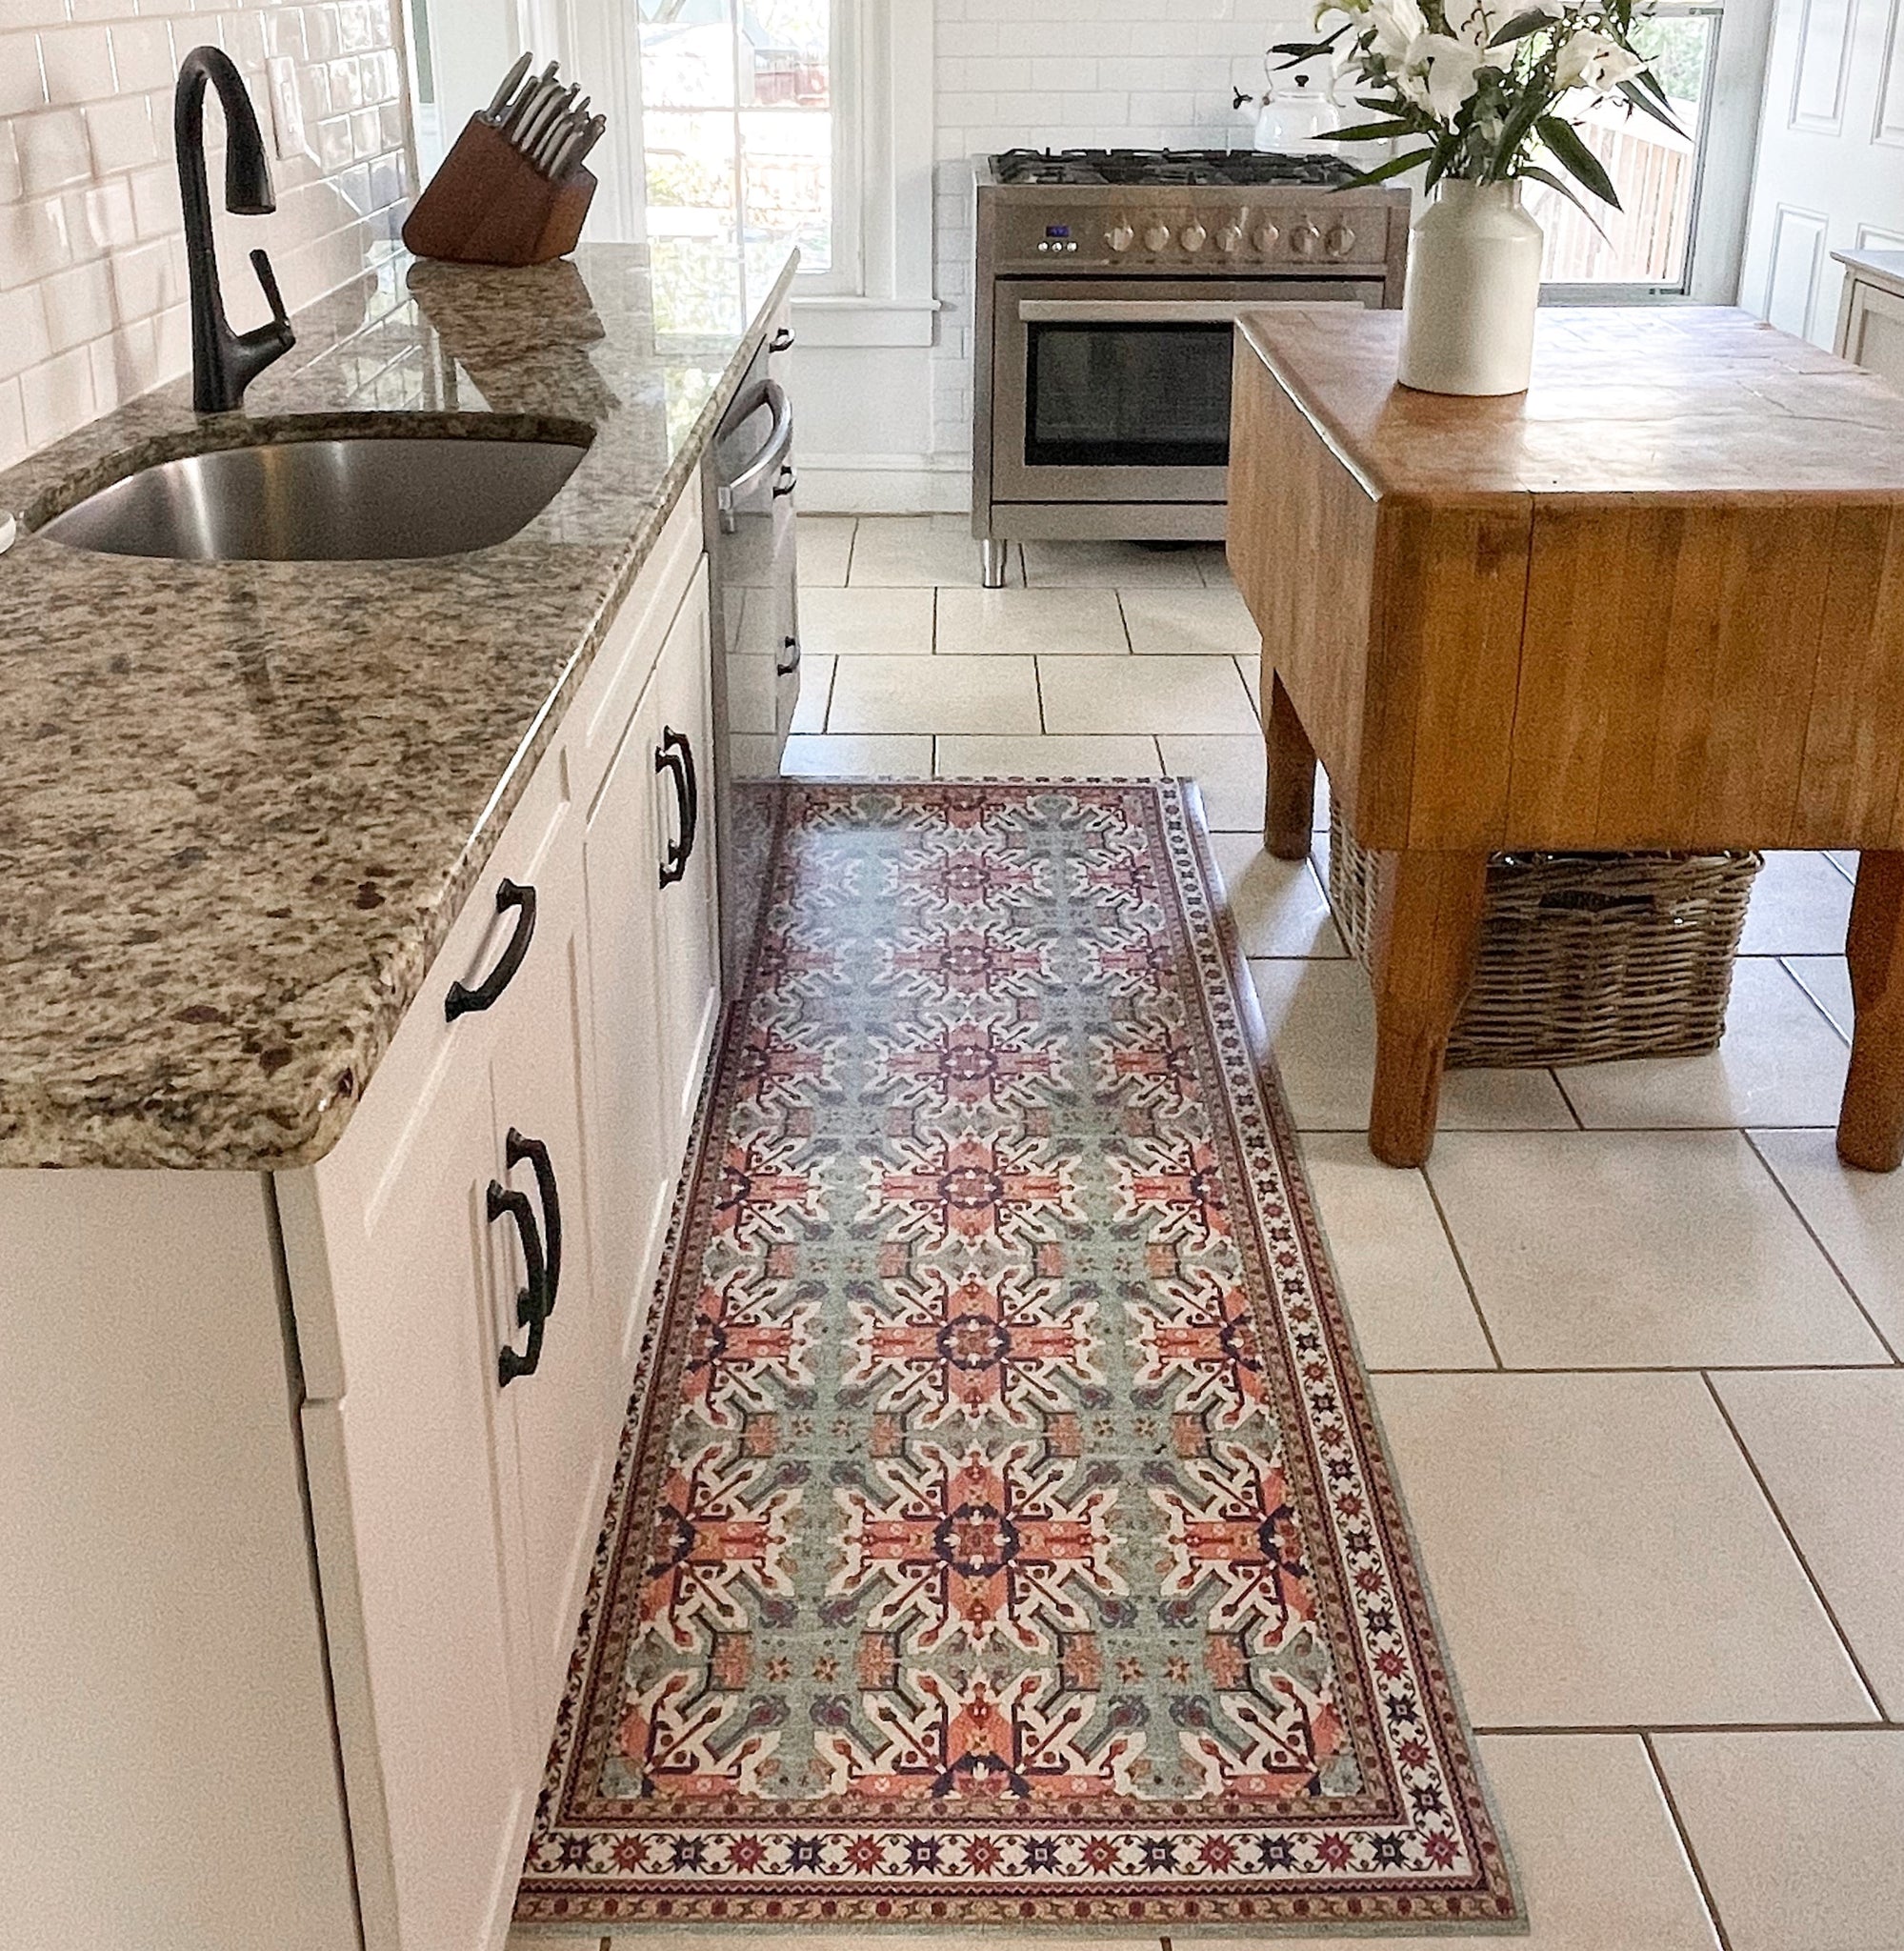 Vinyl Floor Mat With Decorative Tiles Pattern in Blue. Spanish Style Area  Rug, Kitchen Rug, Printed on PVC. Art Mat PVC Rugs. 